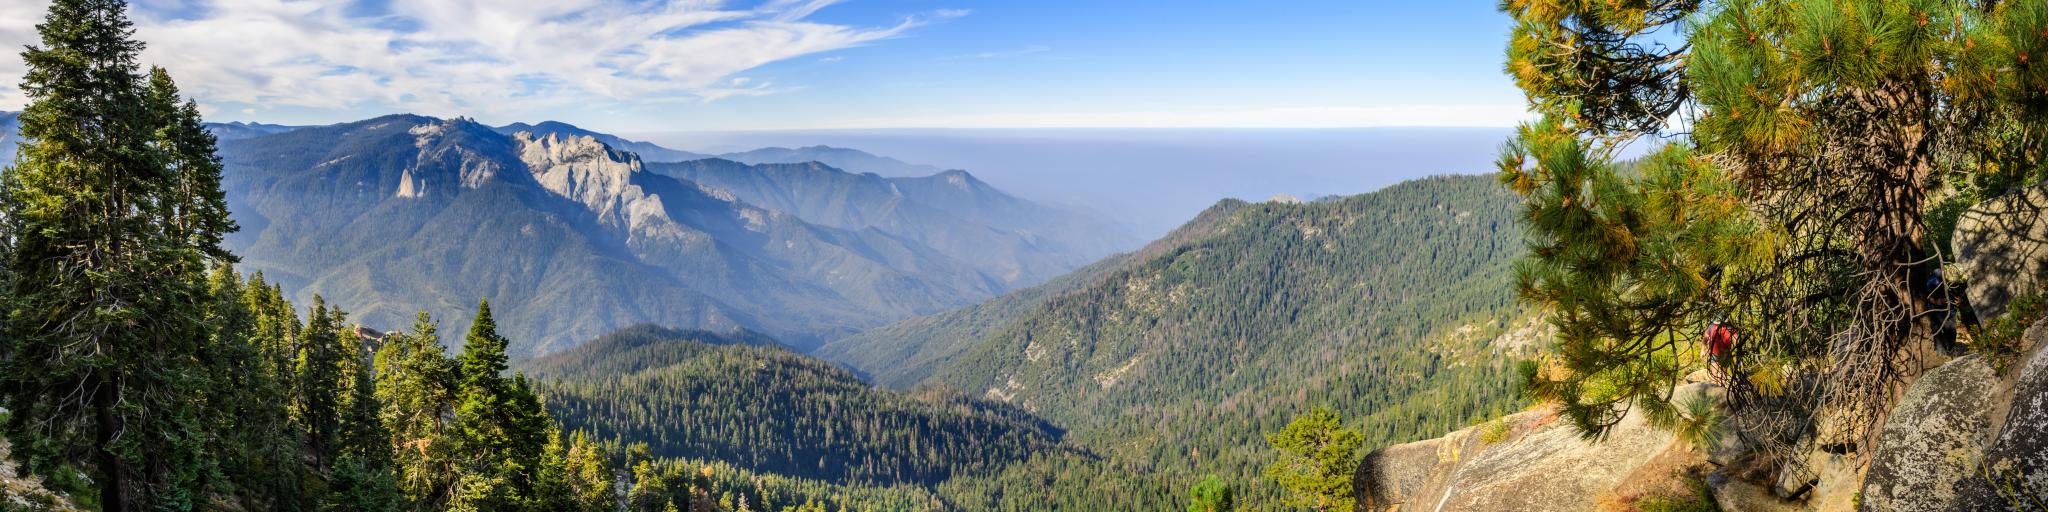 Panoramic shot of Sequoia National Park, with the mountains soaring to the blue sky and towering sequoia trees all around